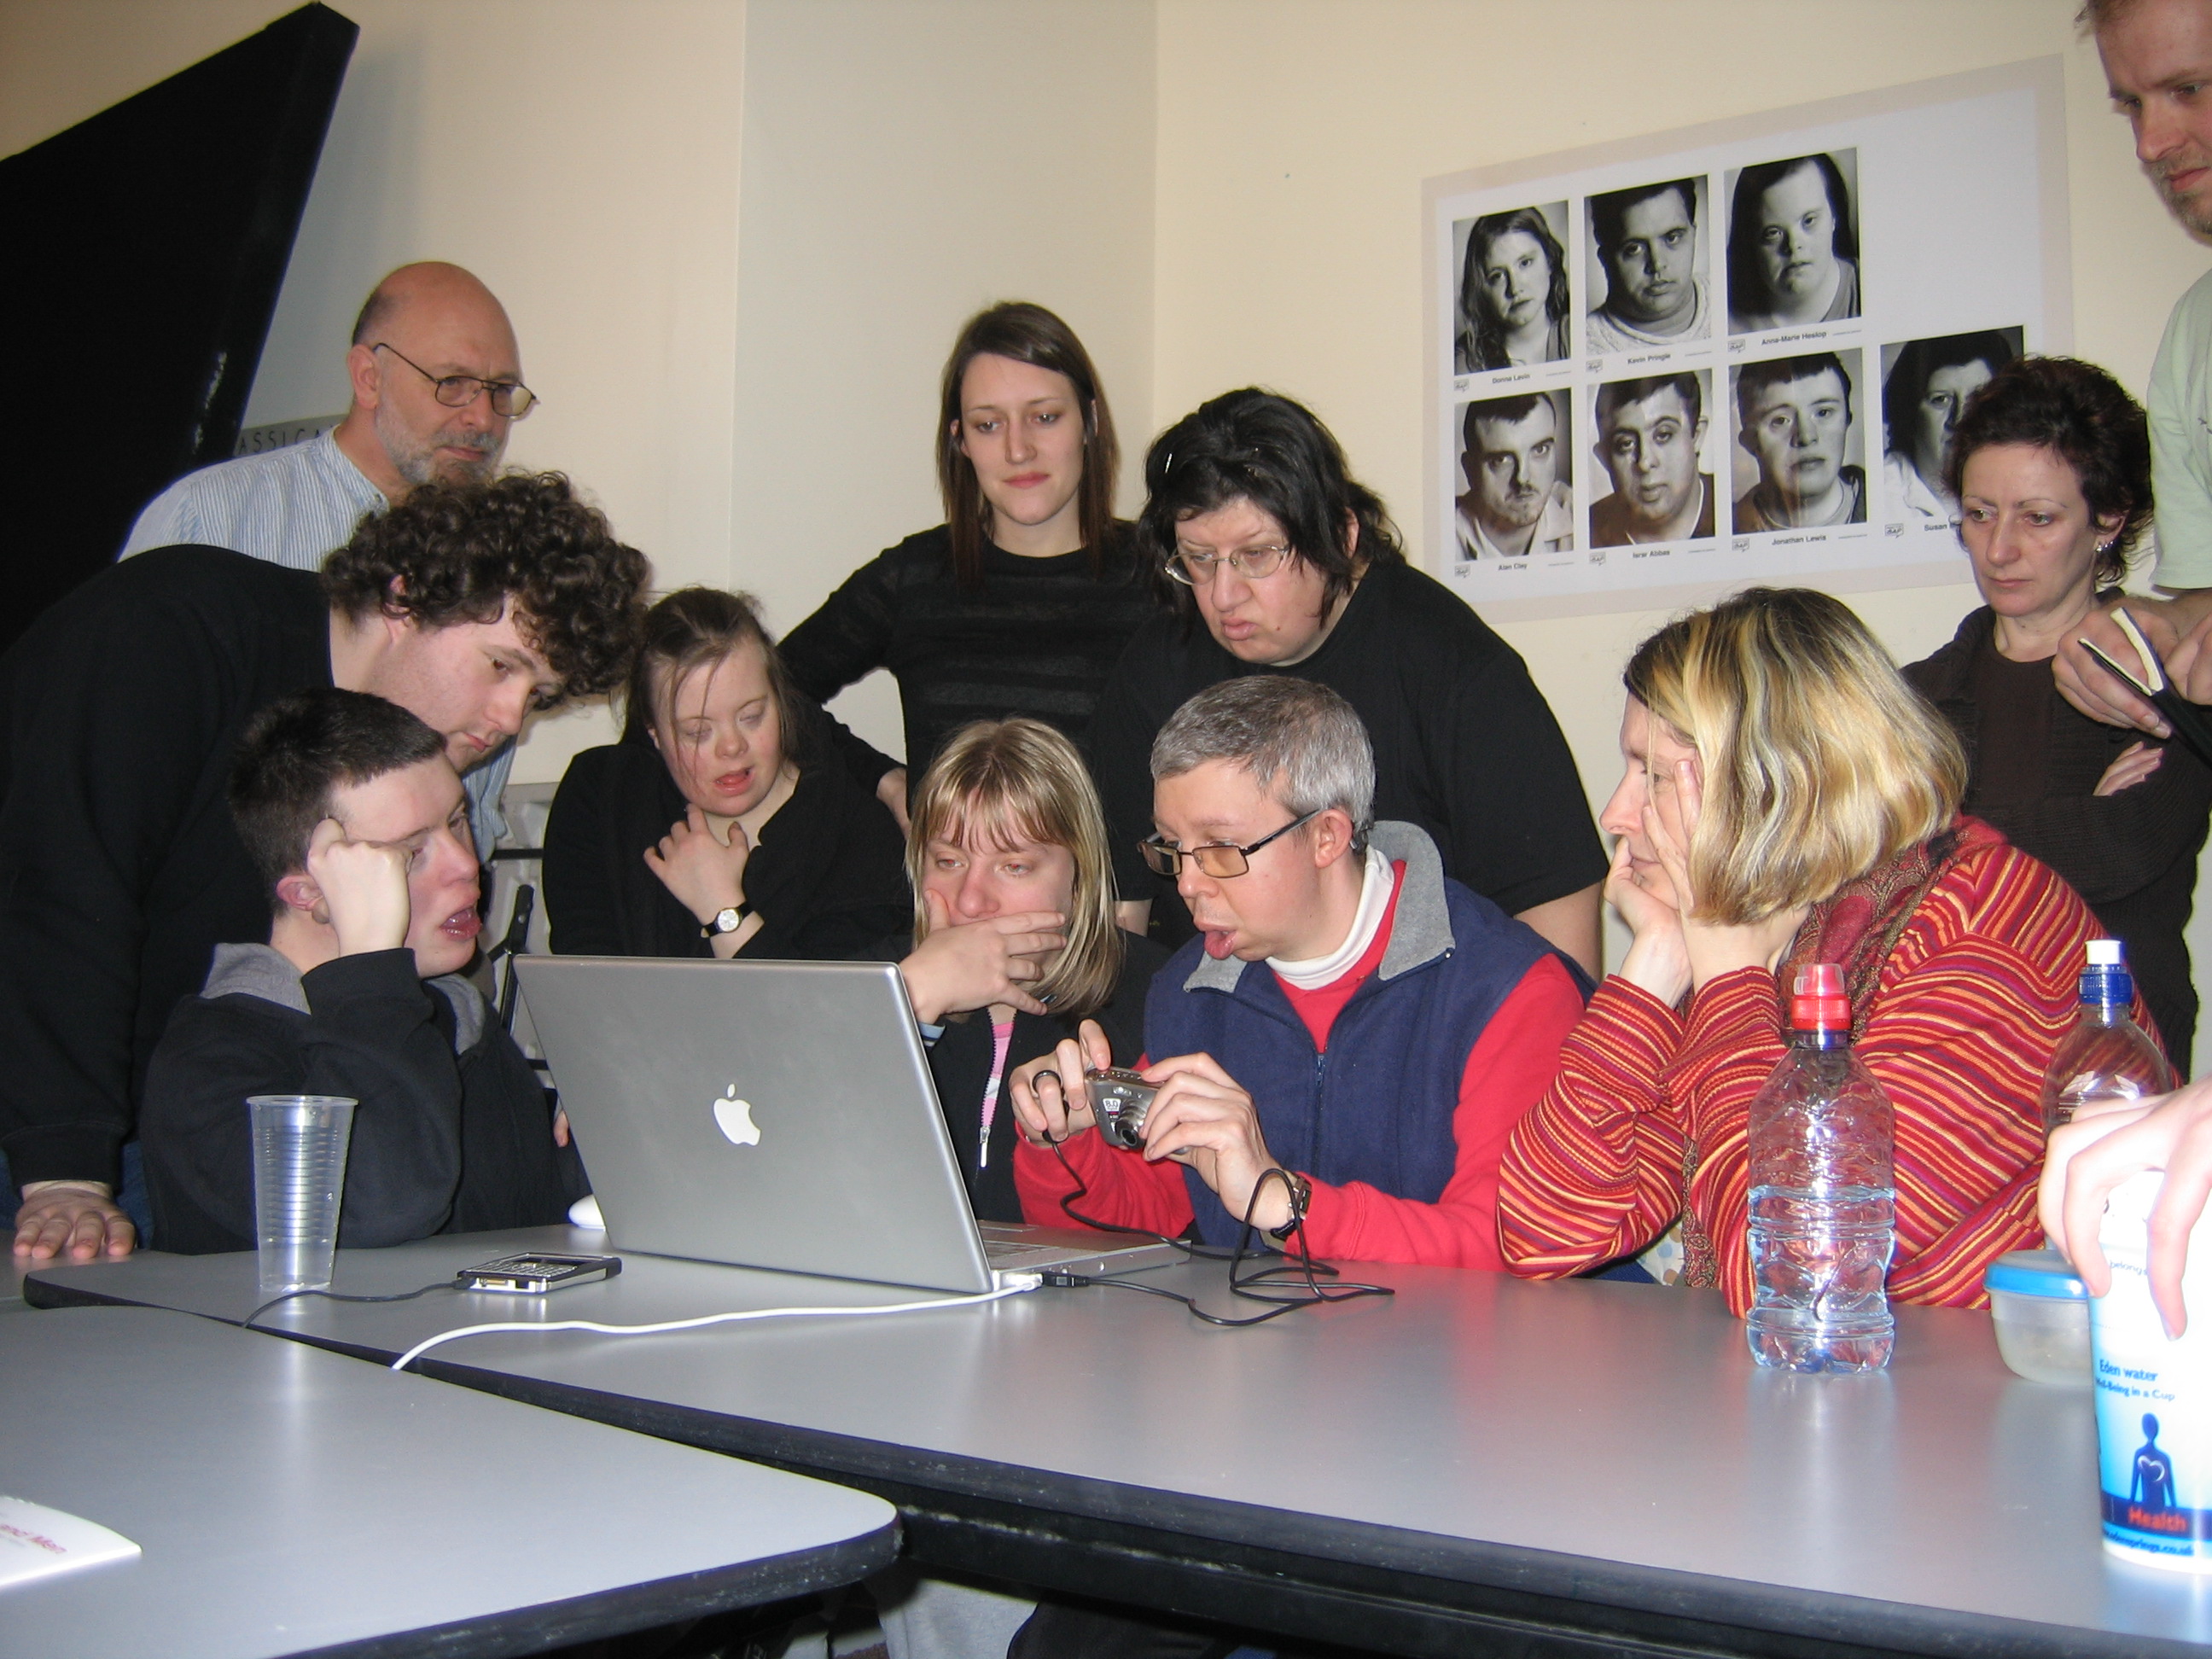 Group of users with various abilities gathered around laptop testing equipment